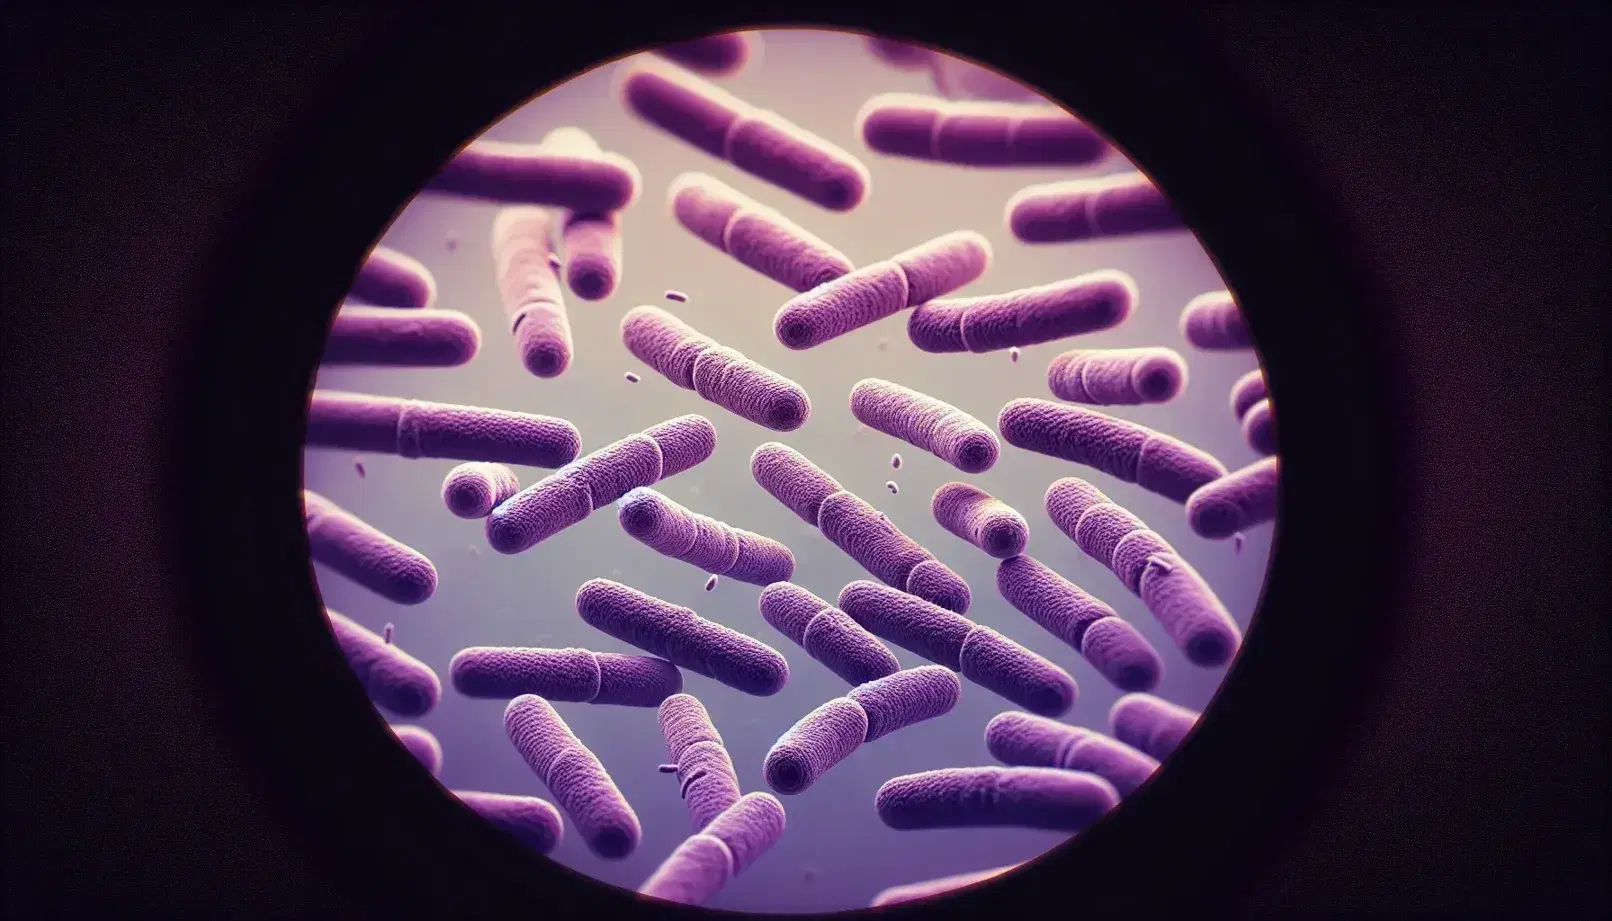 Close-up view of violet-stained rod-shaped bacteria under light microscope, scattered across a gradient purple background from Gram staining.